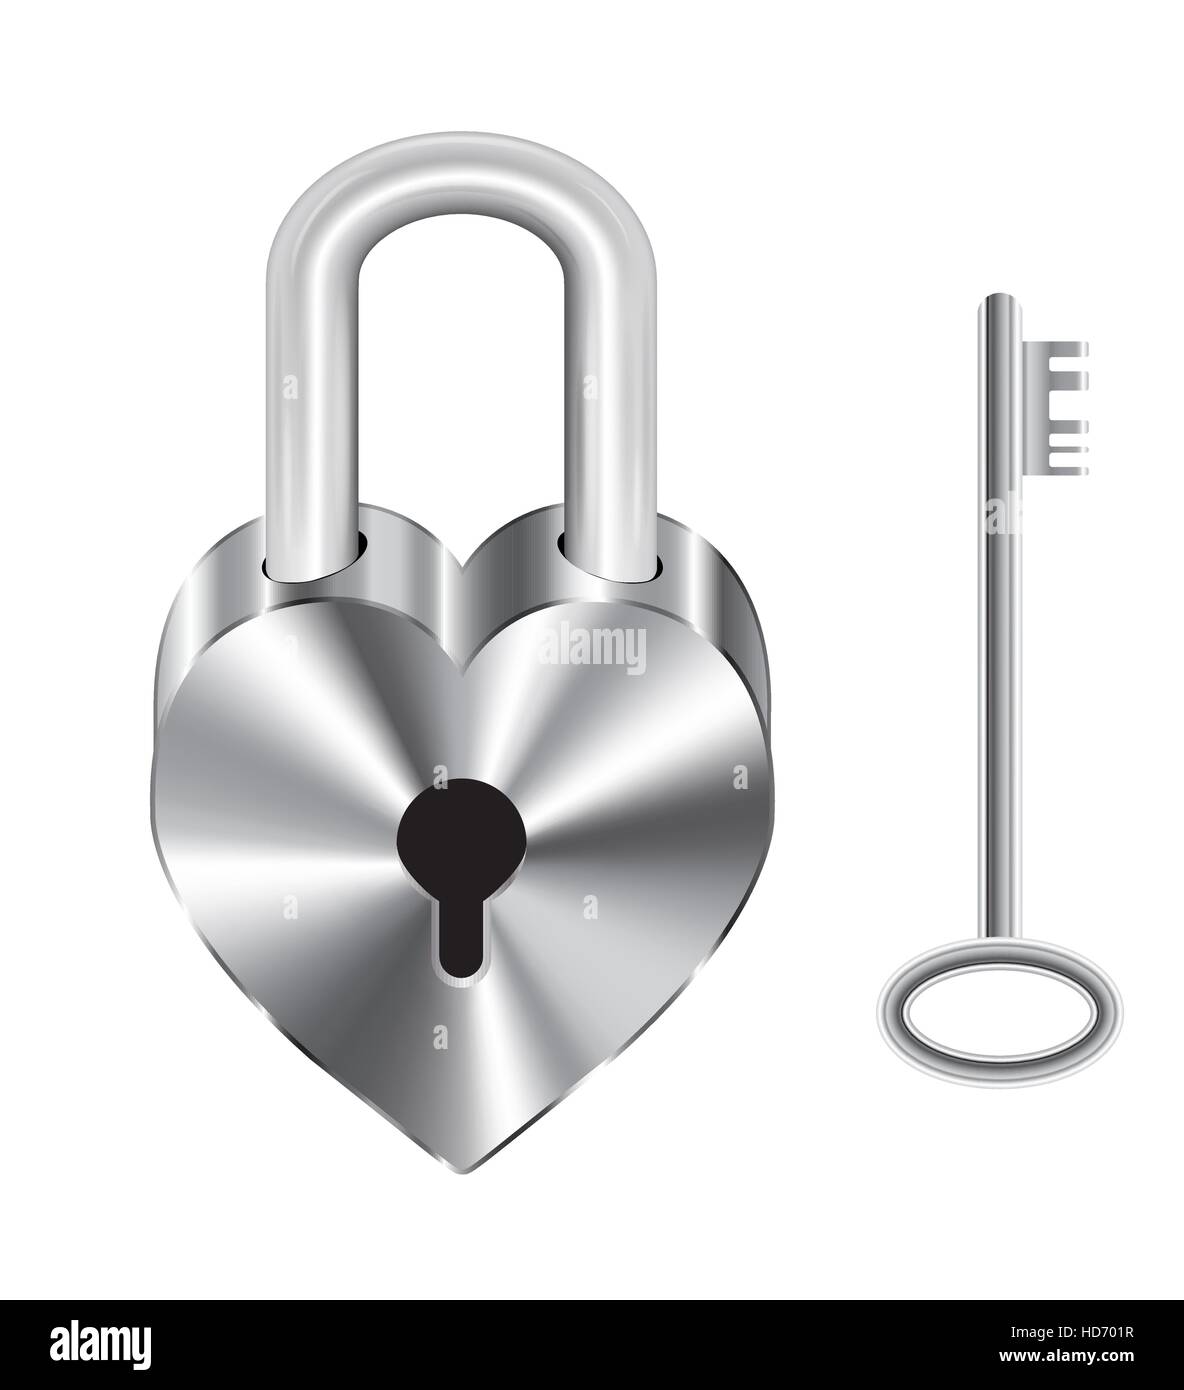 Closed red pad lock with key, 3d icon Stock Illustration